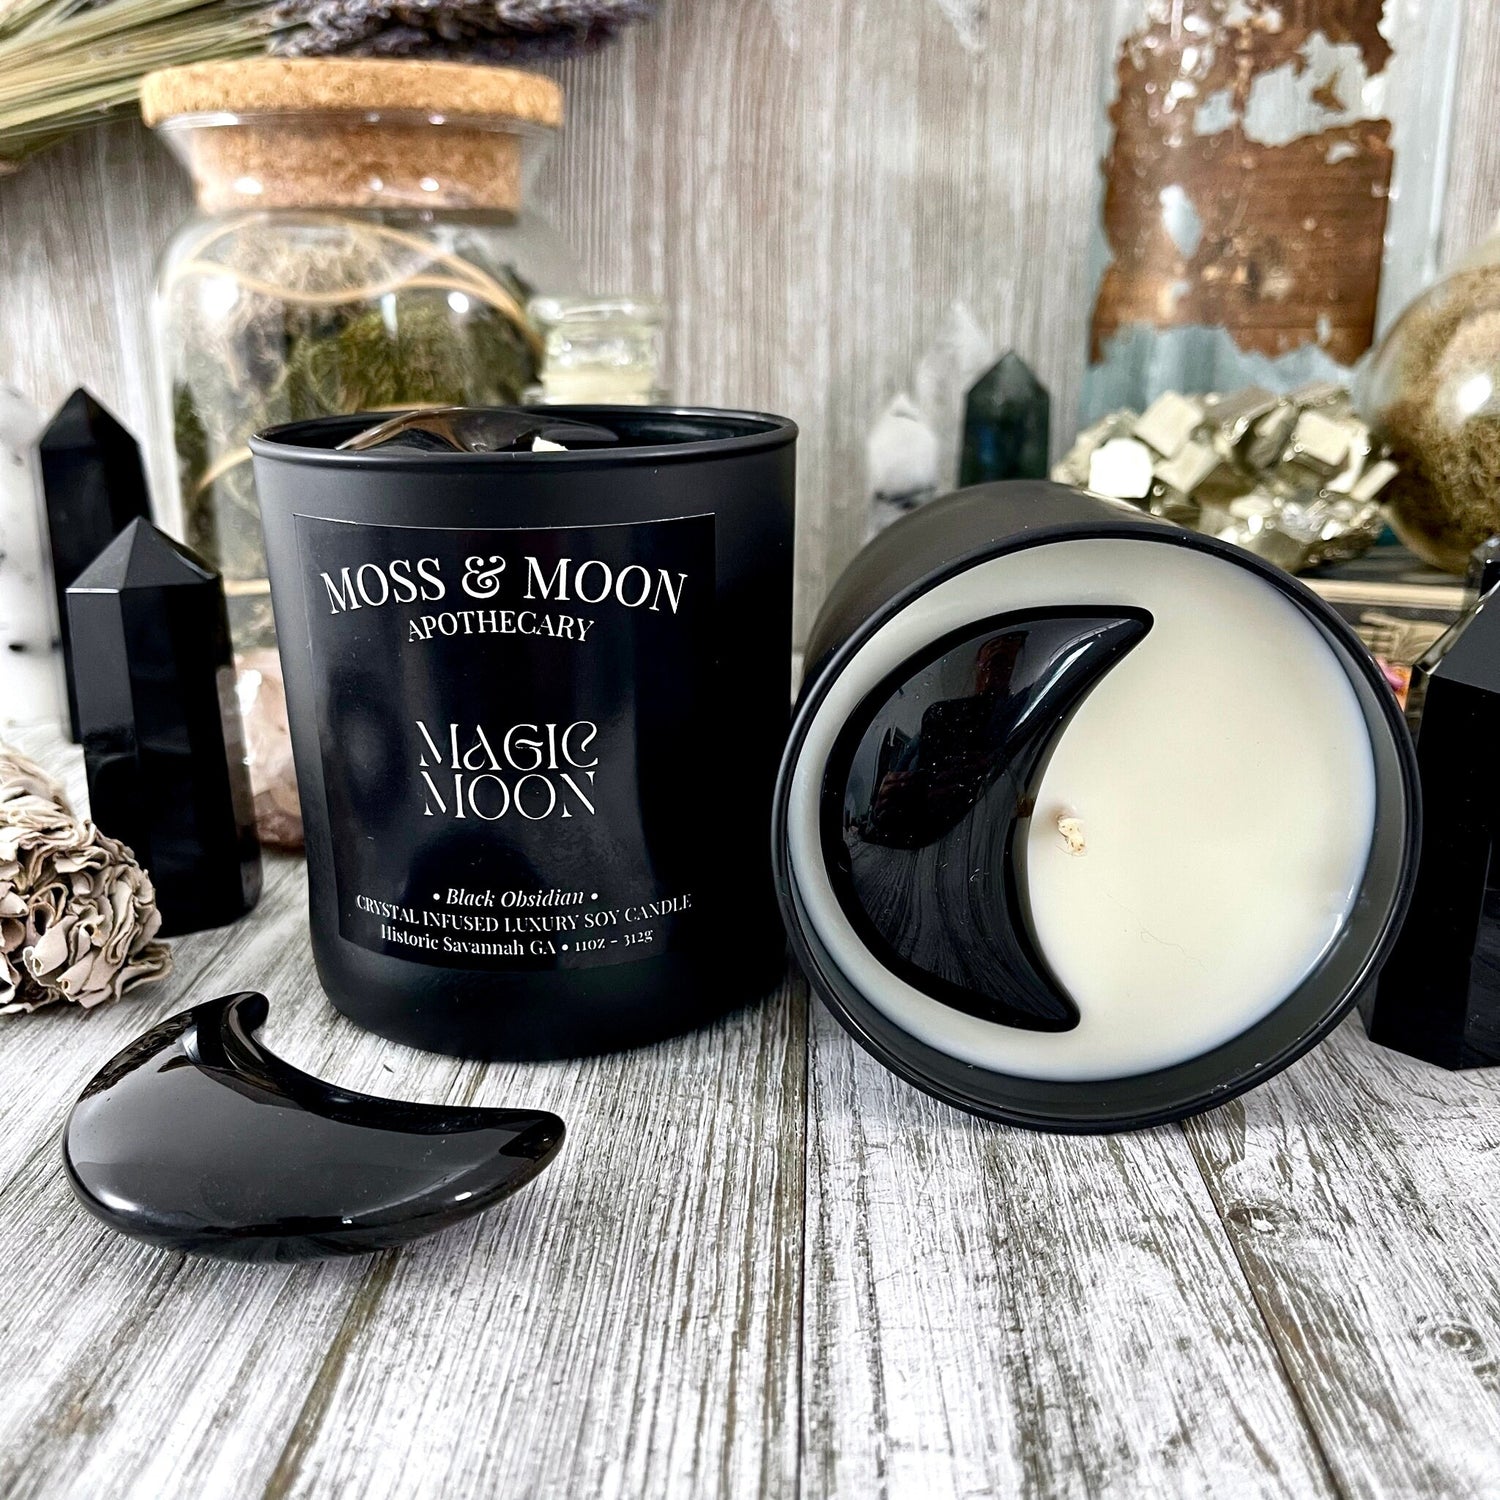 Magic Moon Candle with Black Obsidian - Moss & Moon Apothecary Crystal Infused Luxury Soy Candle